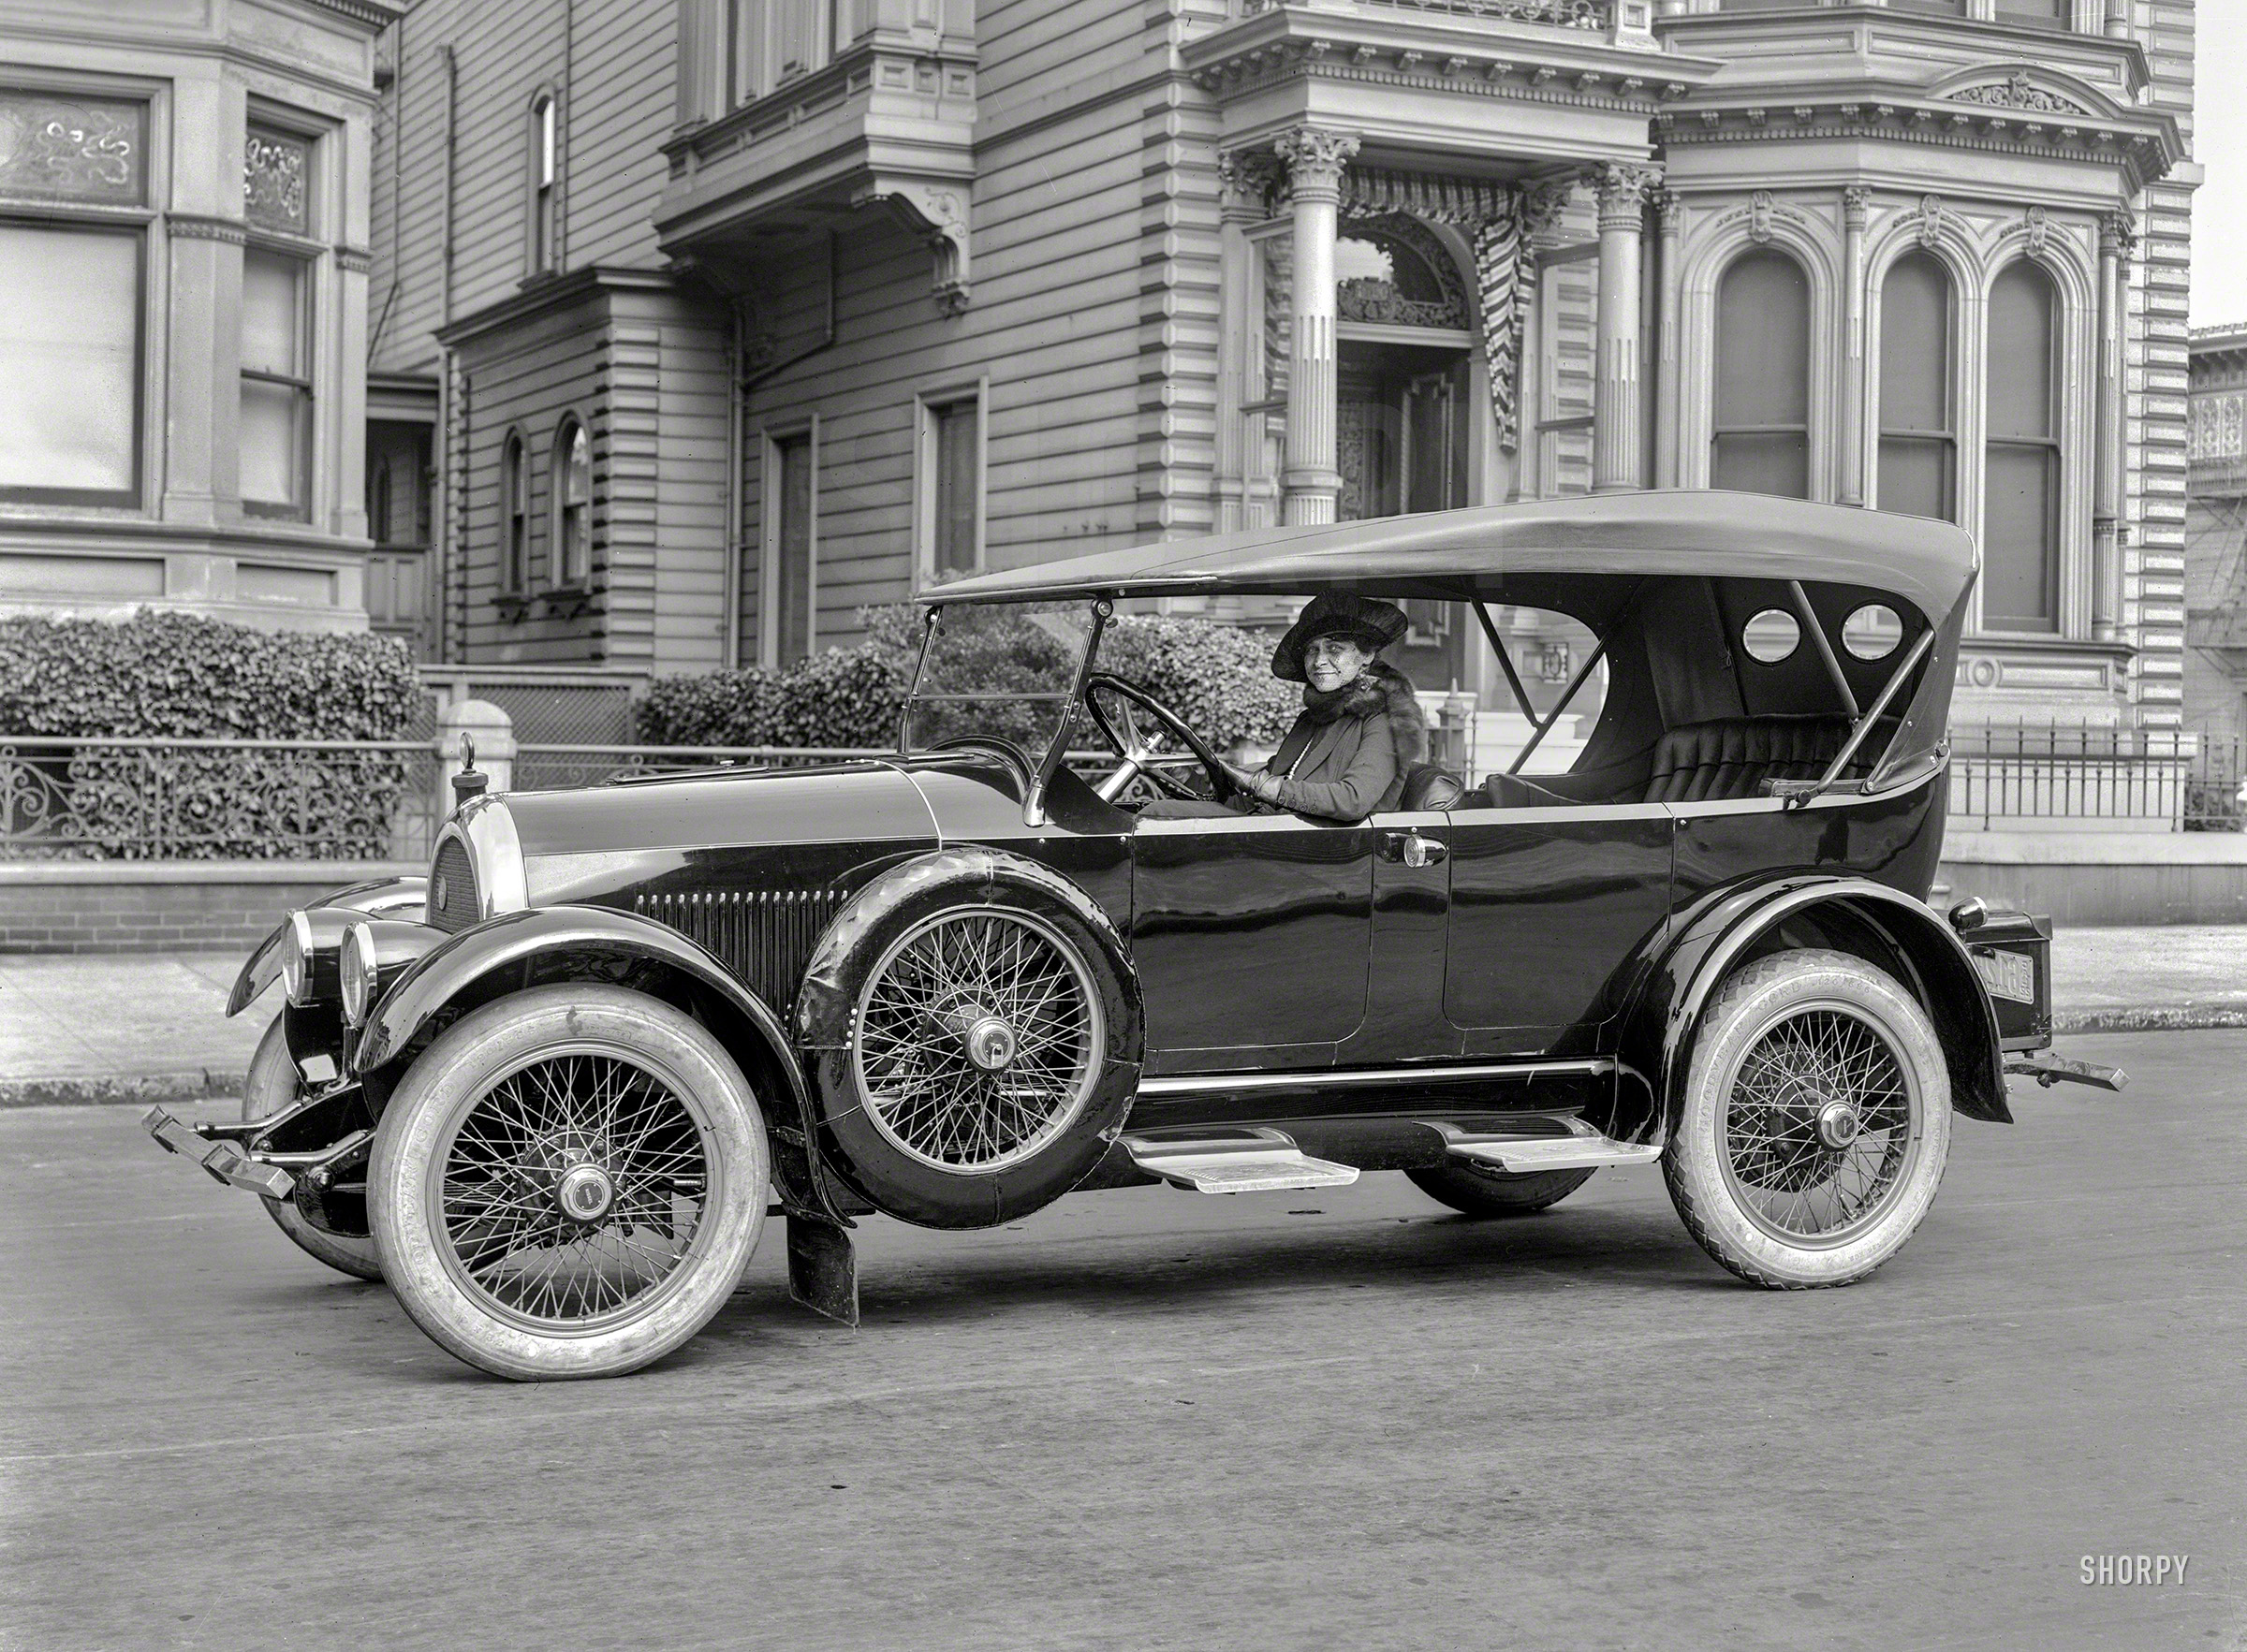 San Francisco, 1922. "Kissel touring car." Latest tenant in the Shorpy Garage of Geriatric Jalopies. 5x7 glass negative by Christopher Helin. View full size.